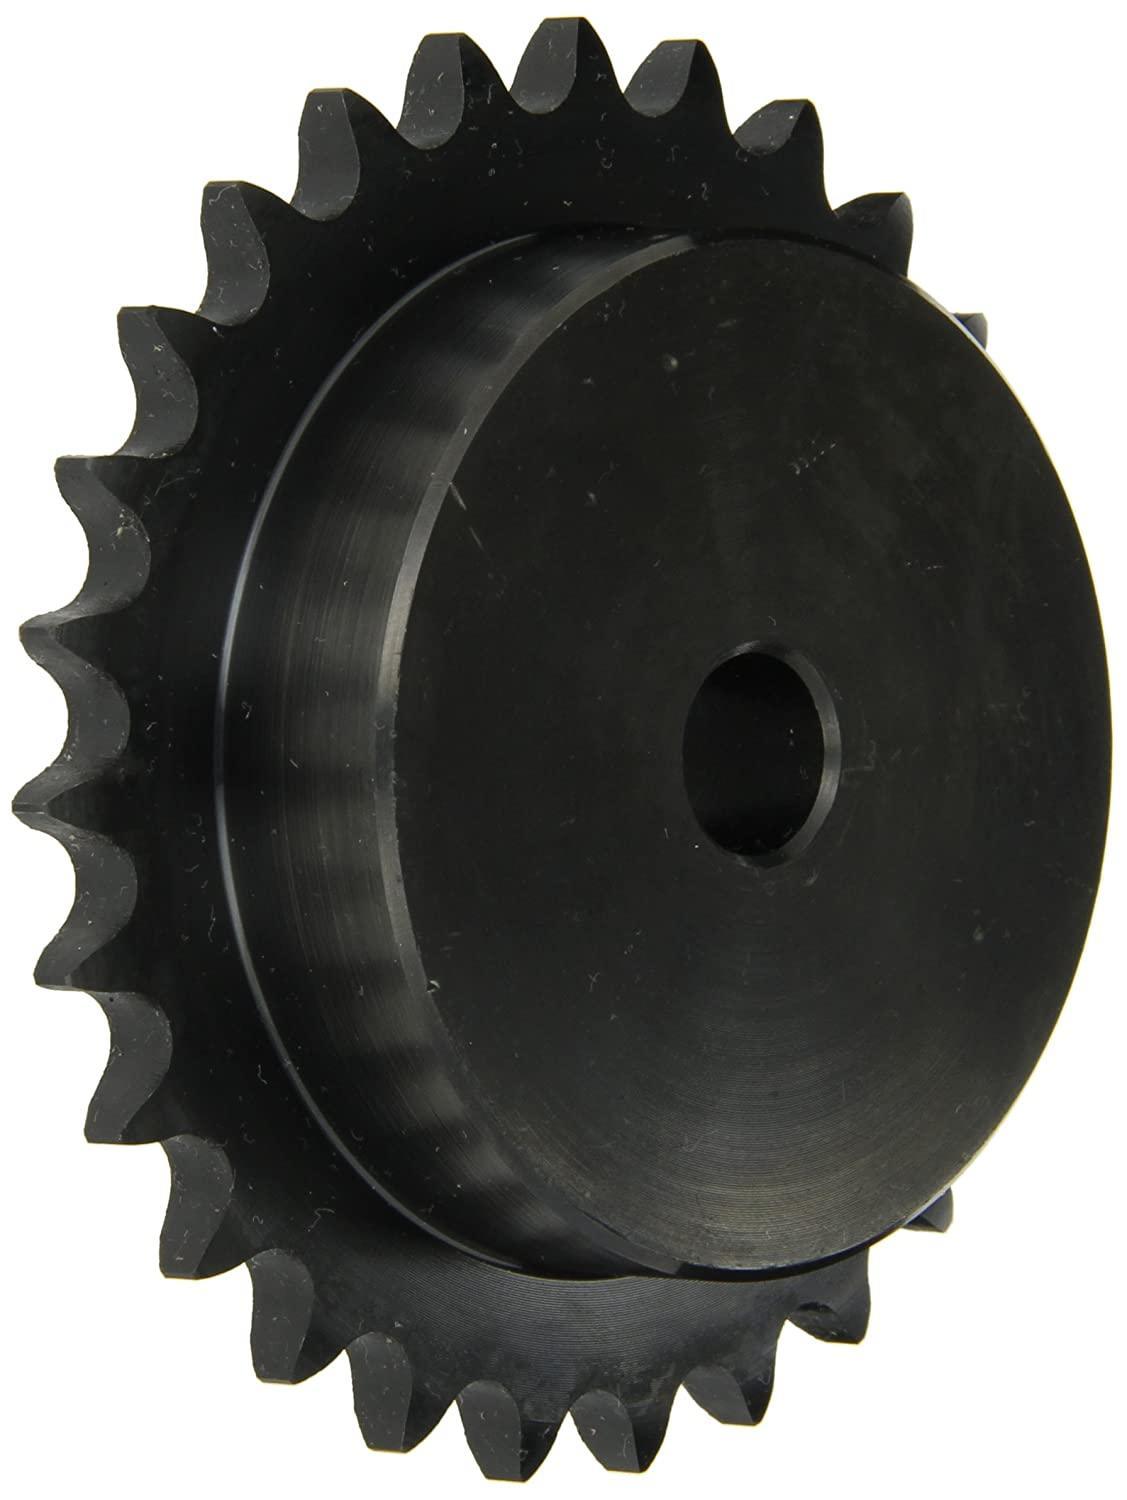 25B22 Roller Chain Sprocket With Stock Bore - Forces Inc